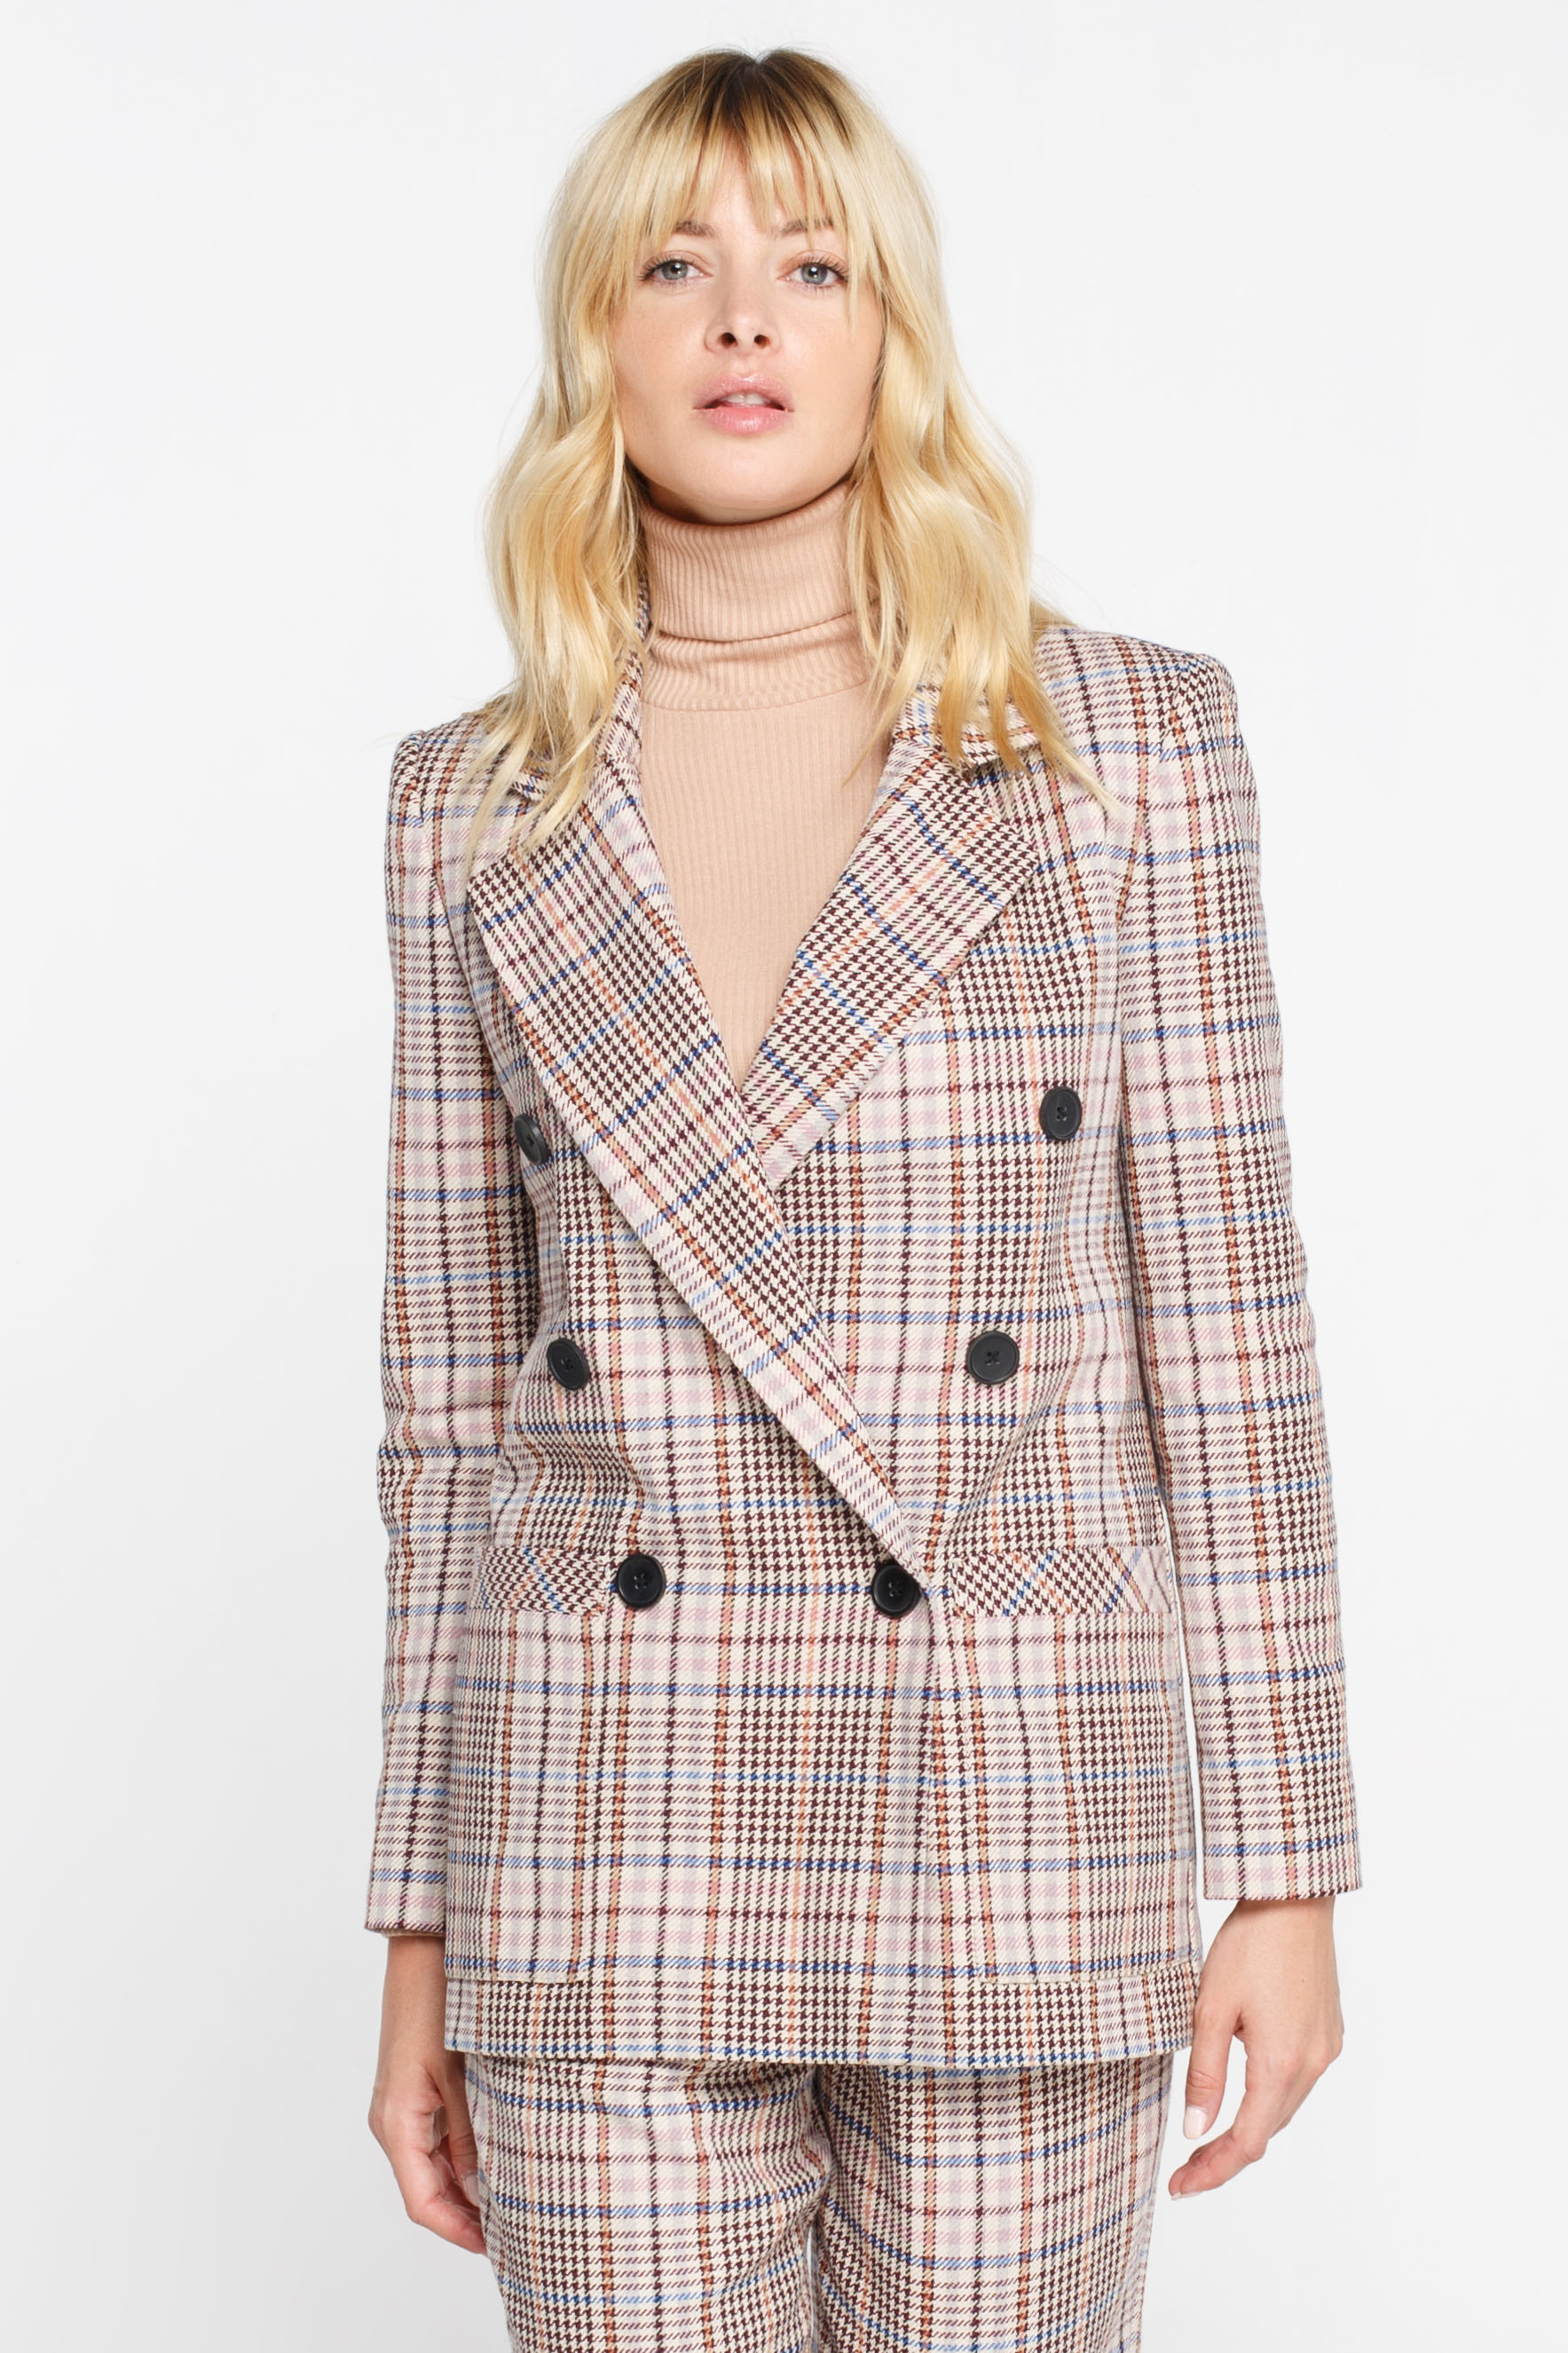 Double-breasted beige plaid suit fabric jacket, photo 1